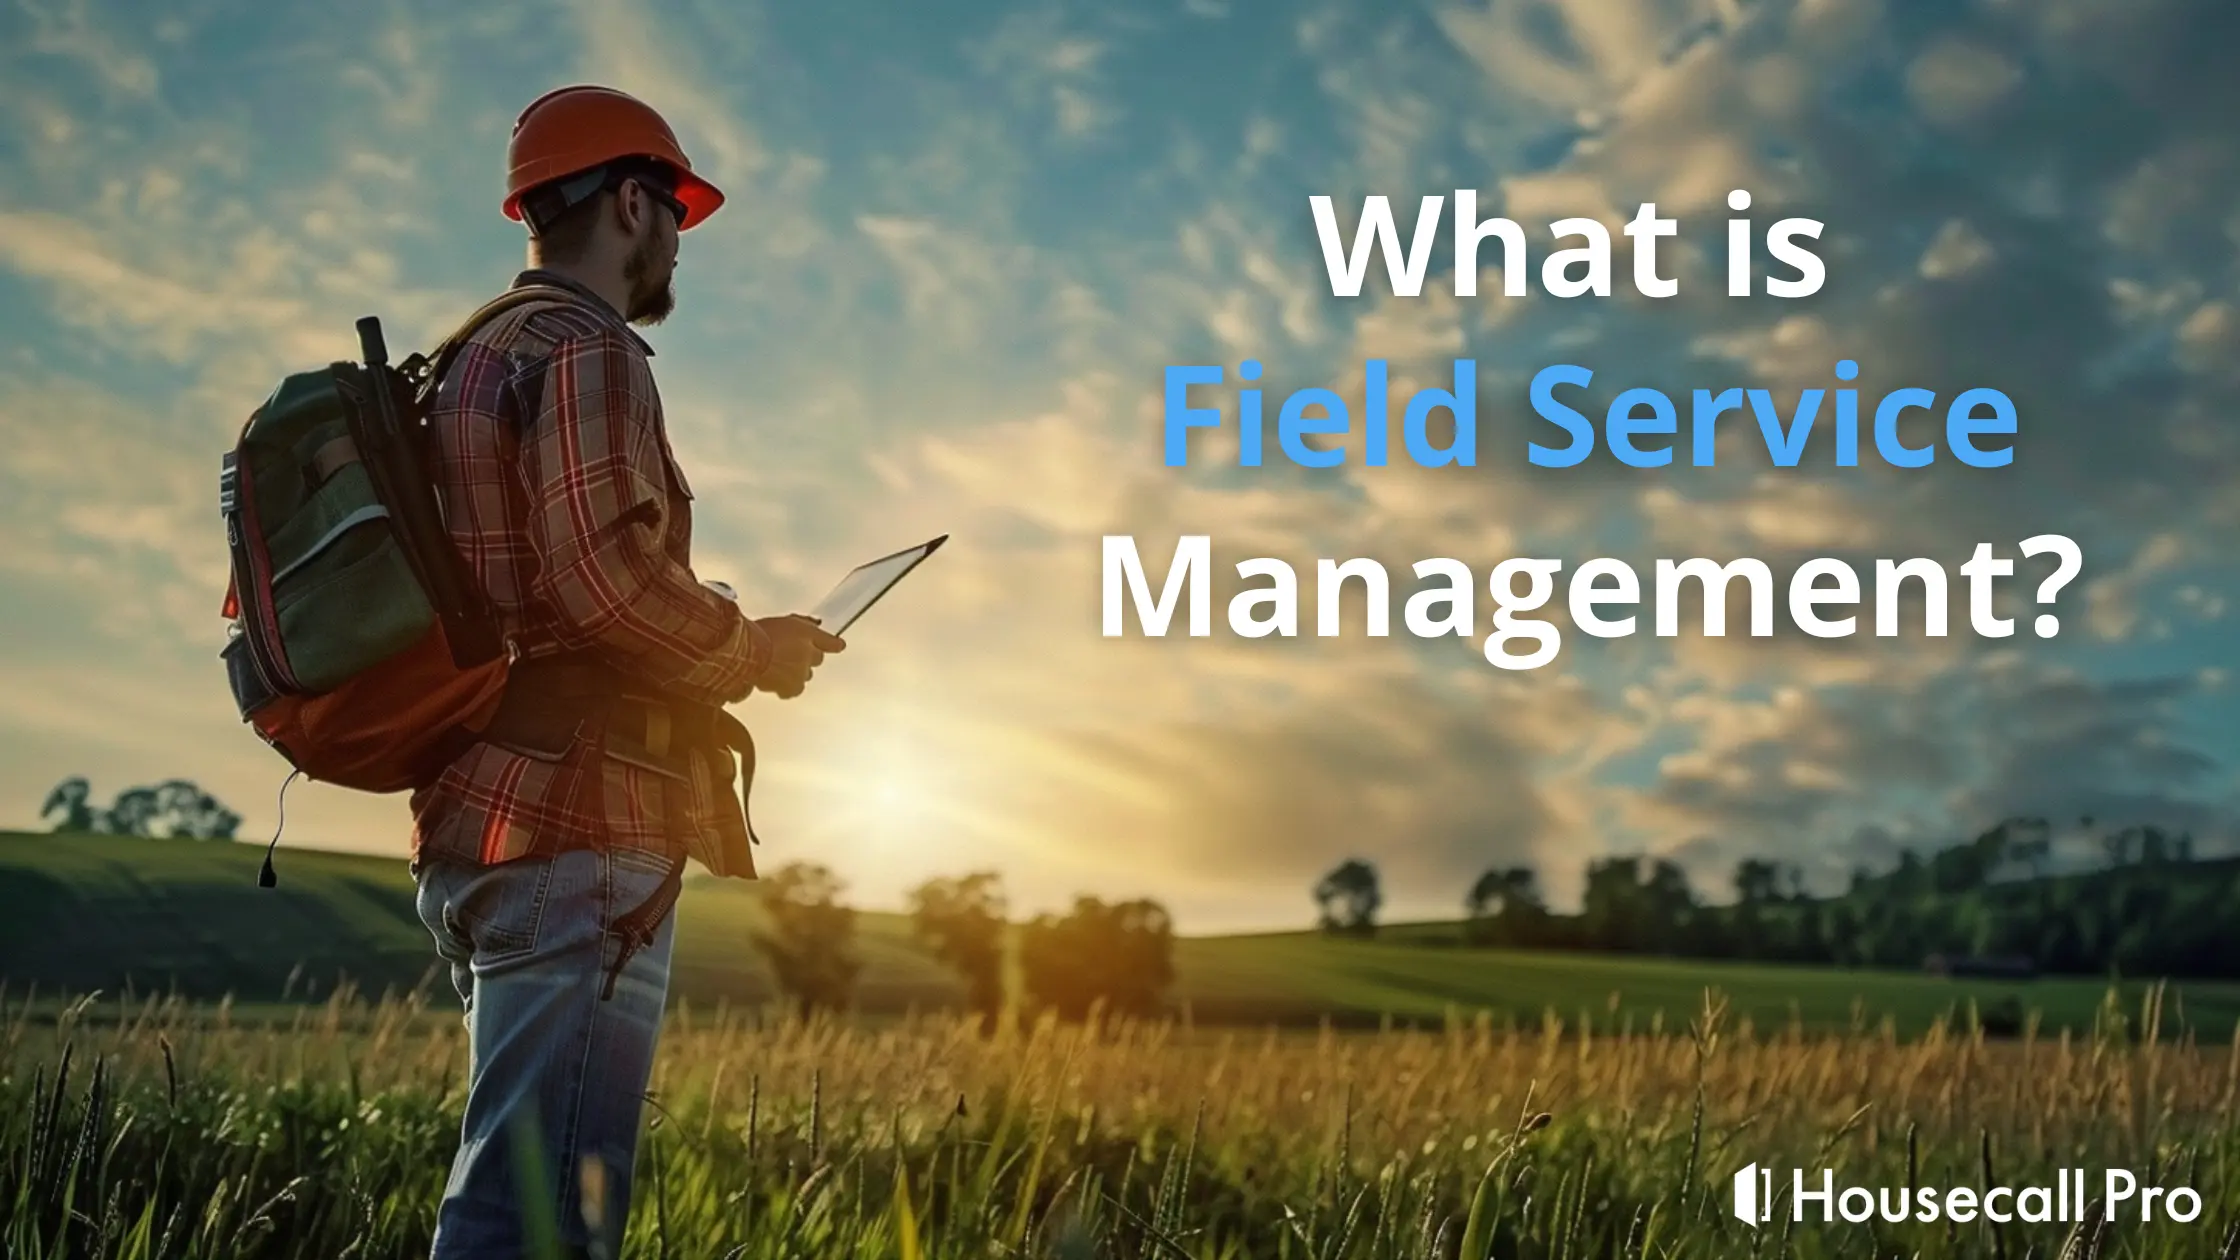 What is Field Service Management